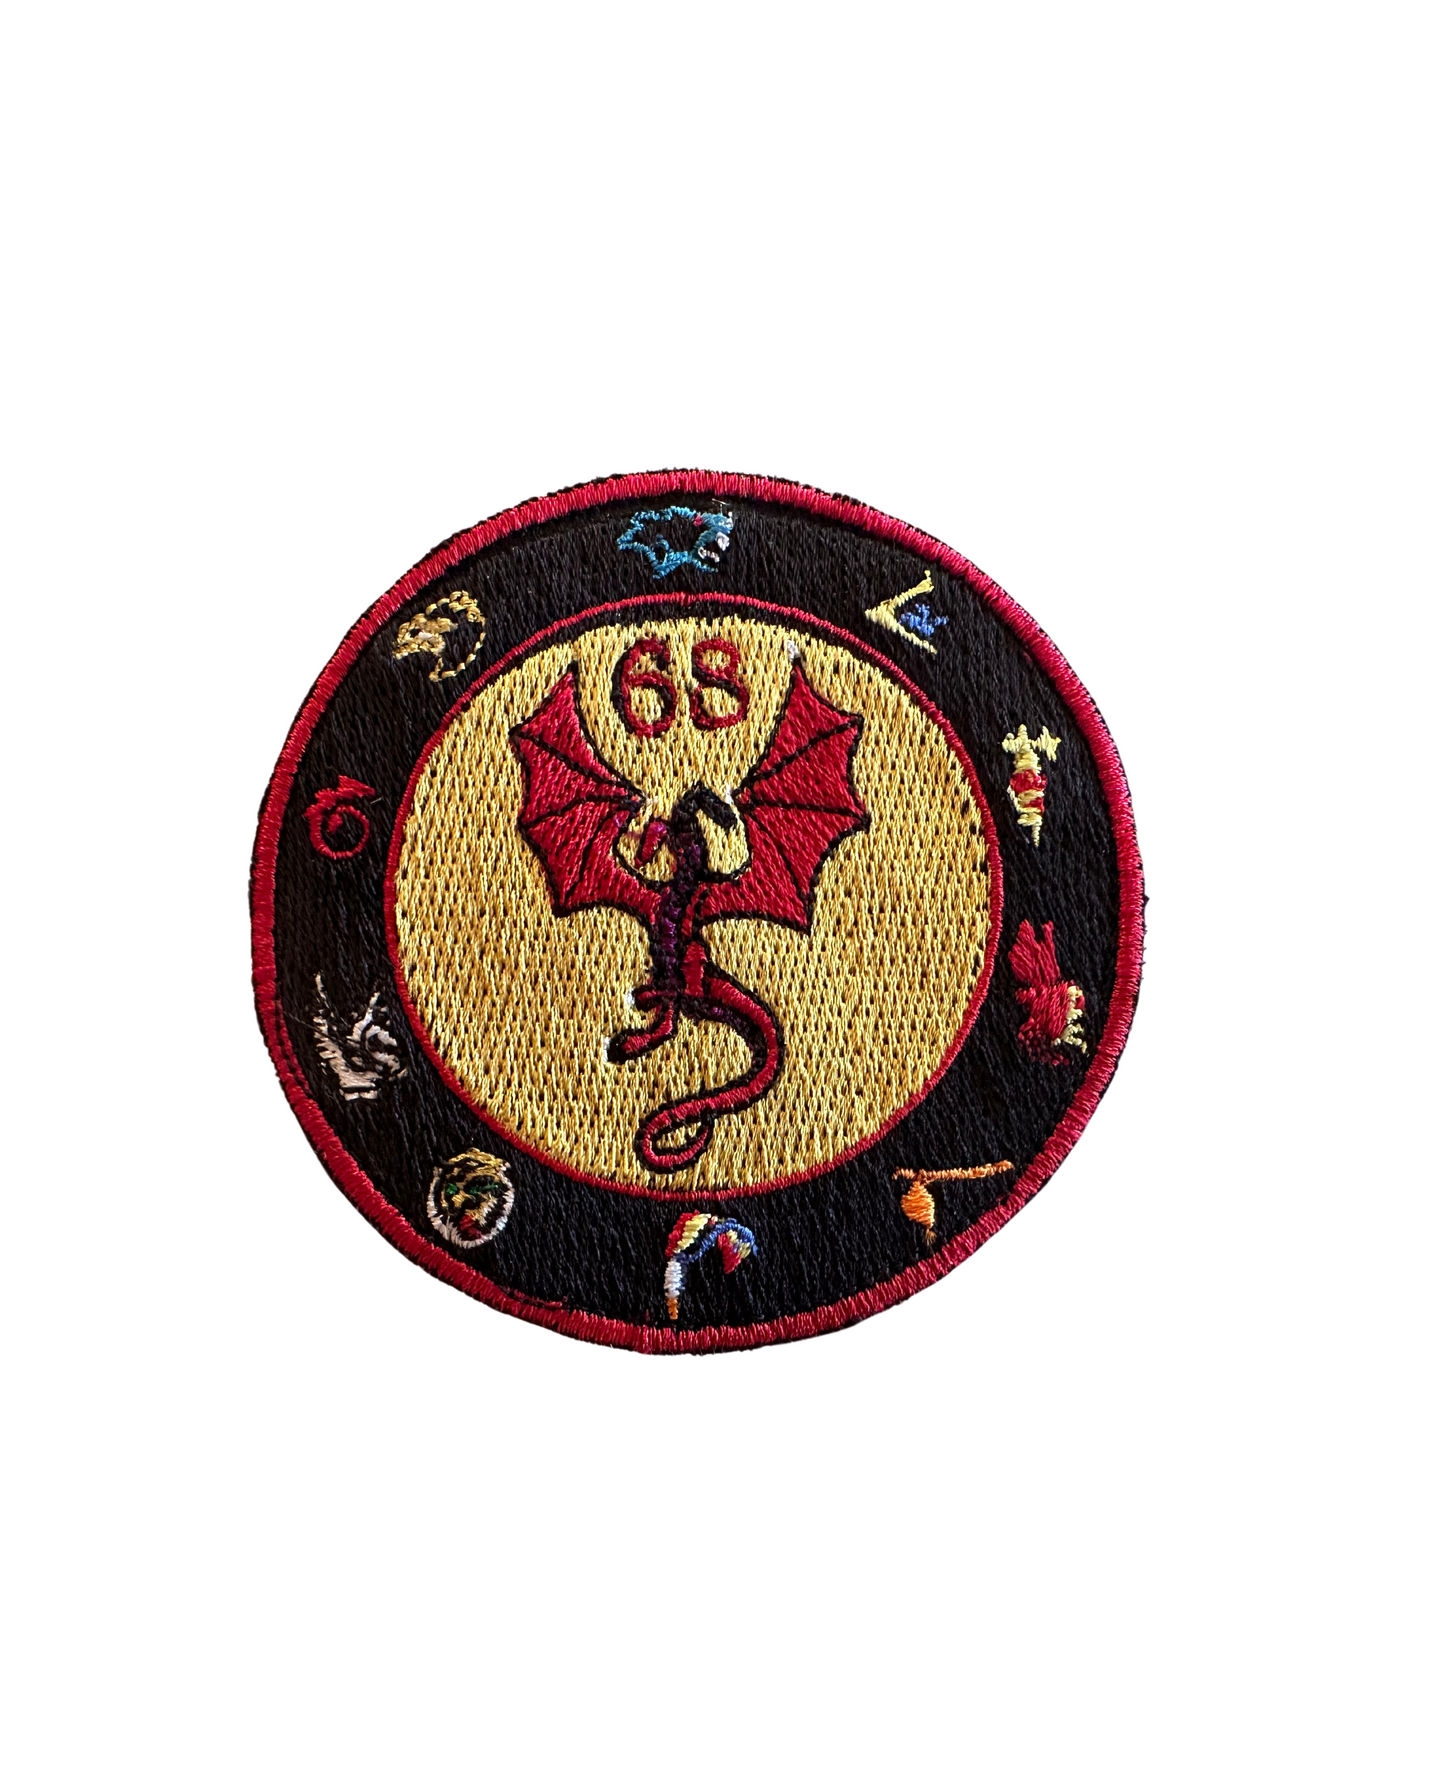 VAQ-139 Command Patch - Embroidery